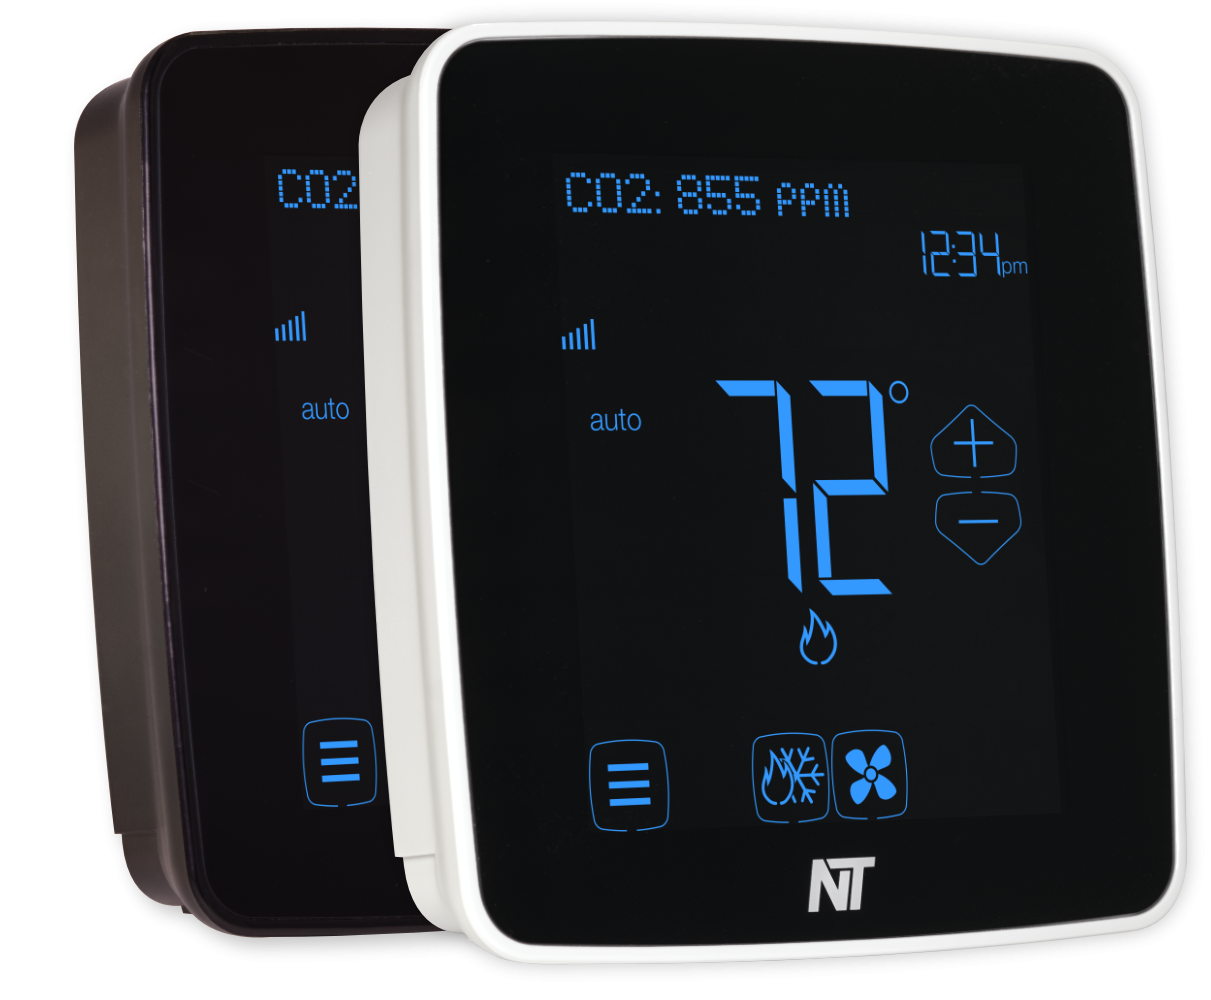  CO2 Monitor And Alerting